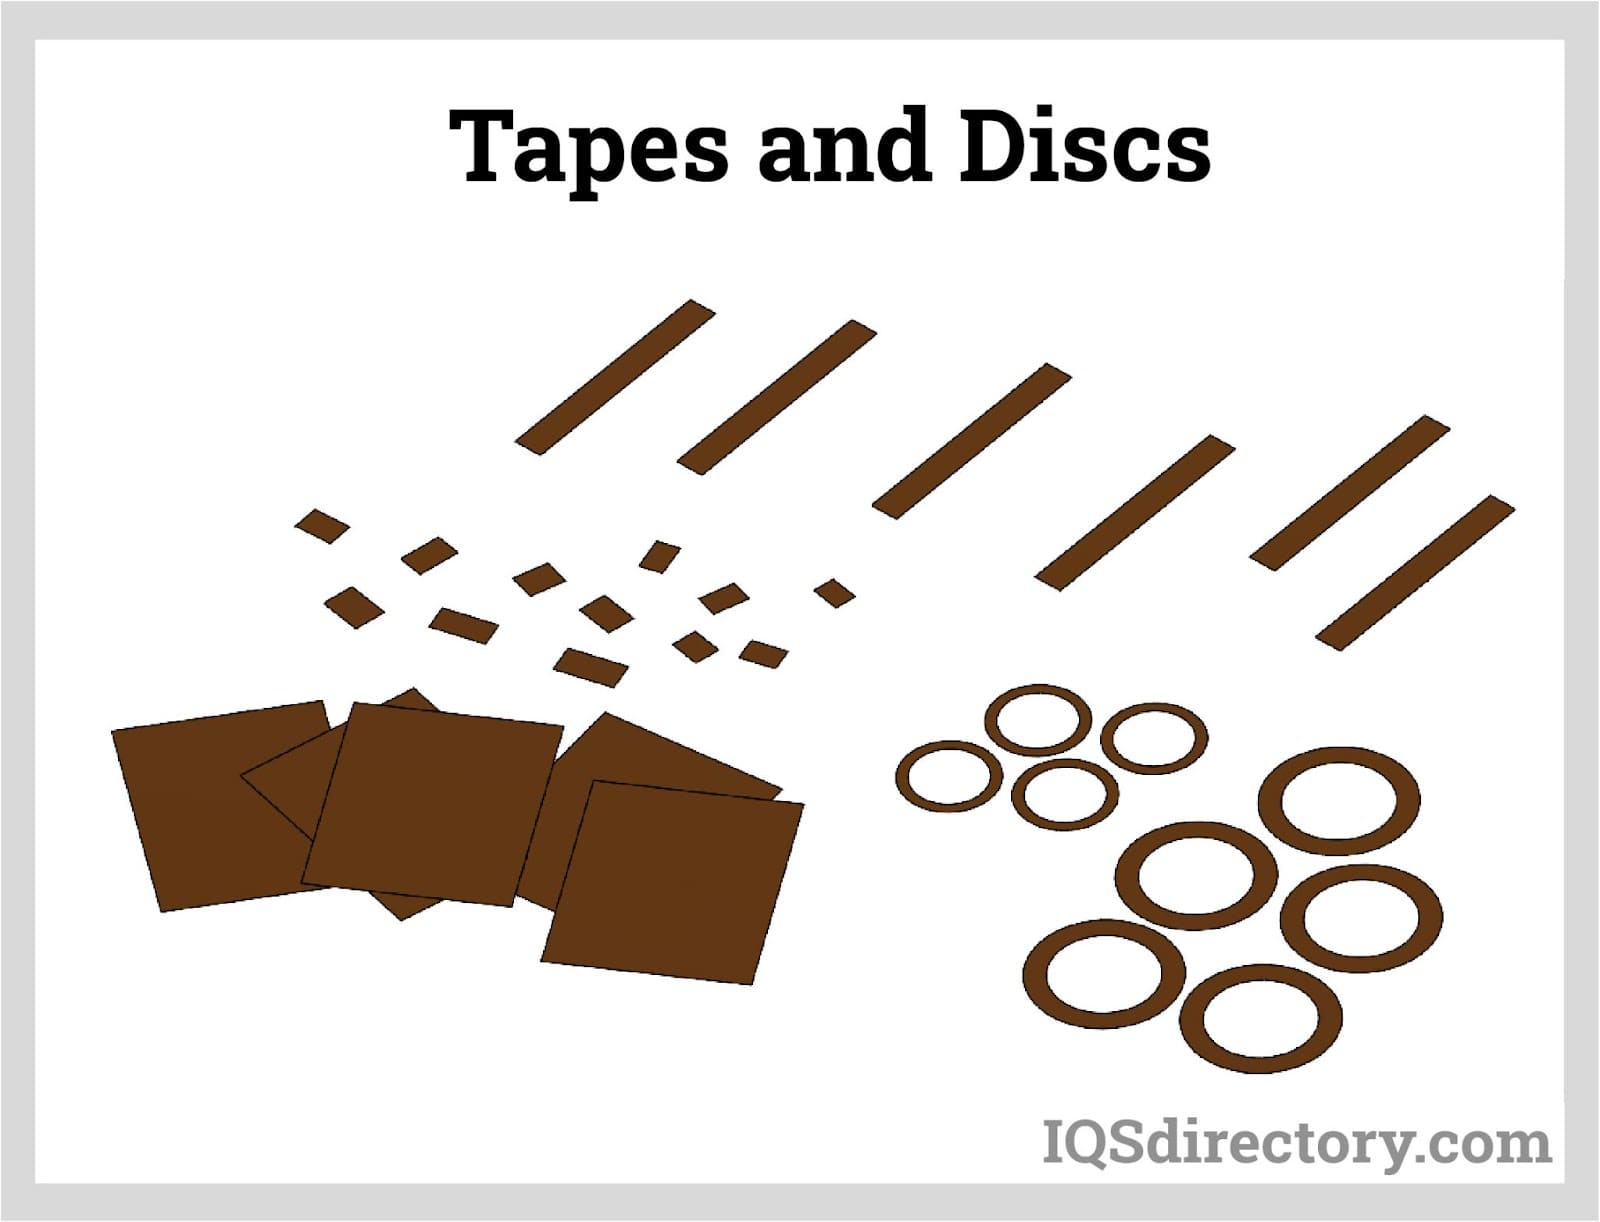 Tapes and Discs